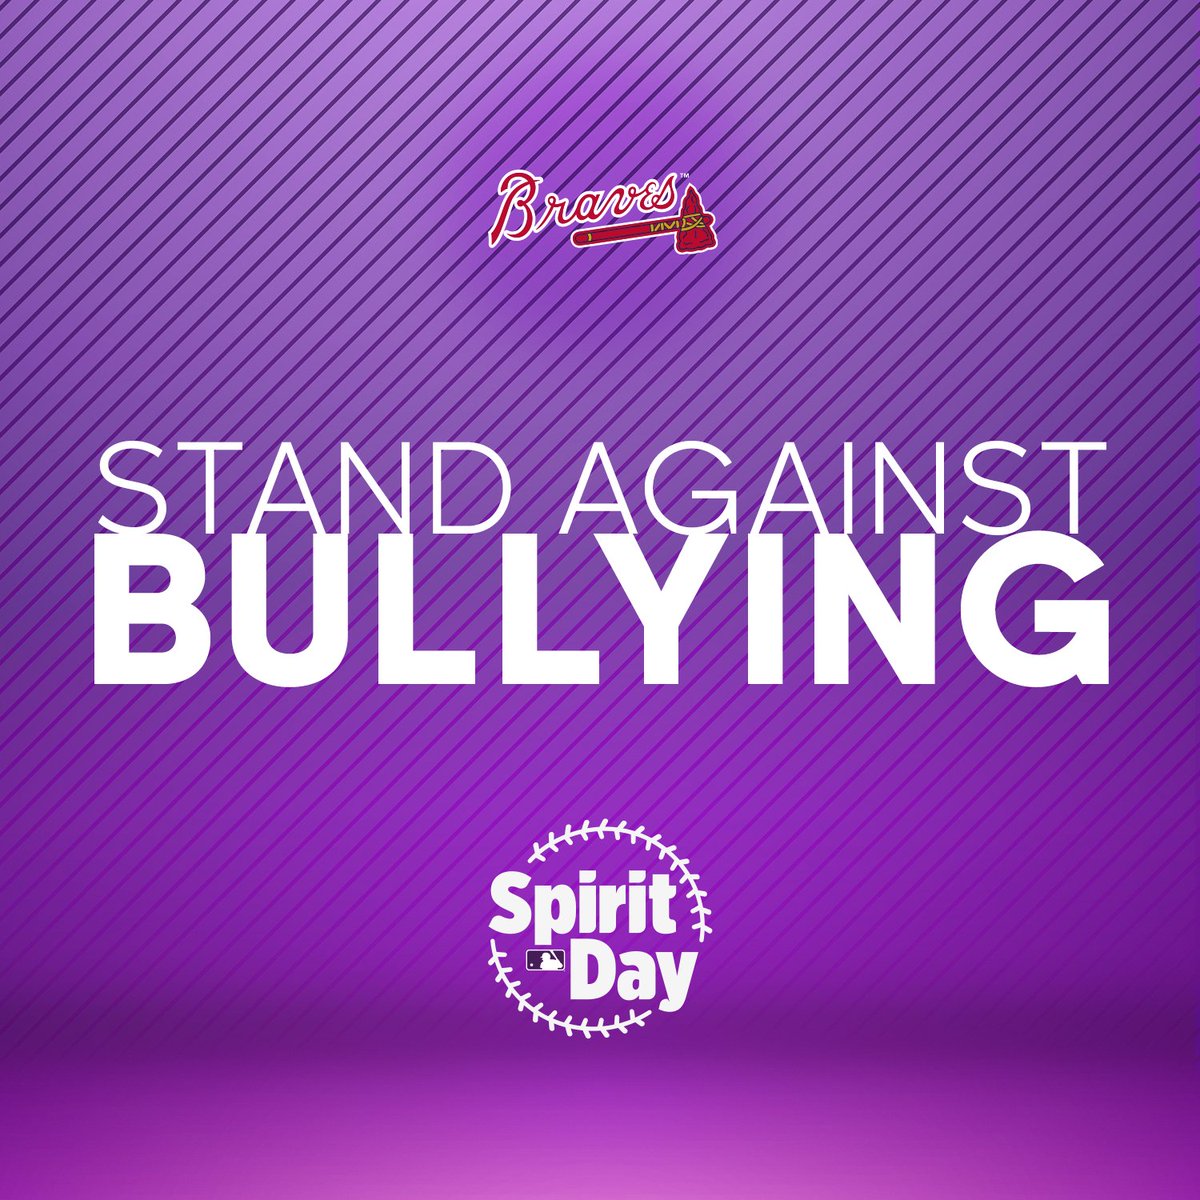 Join the #Braves in taking a stand against bullying of LGBTQ youth and in support of inclusion. #SpiritDay